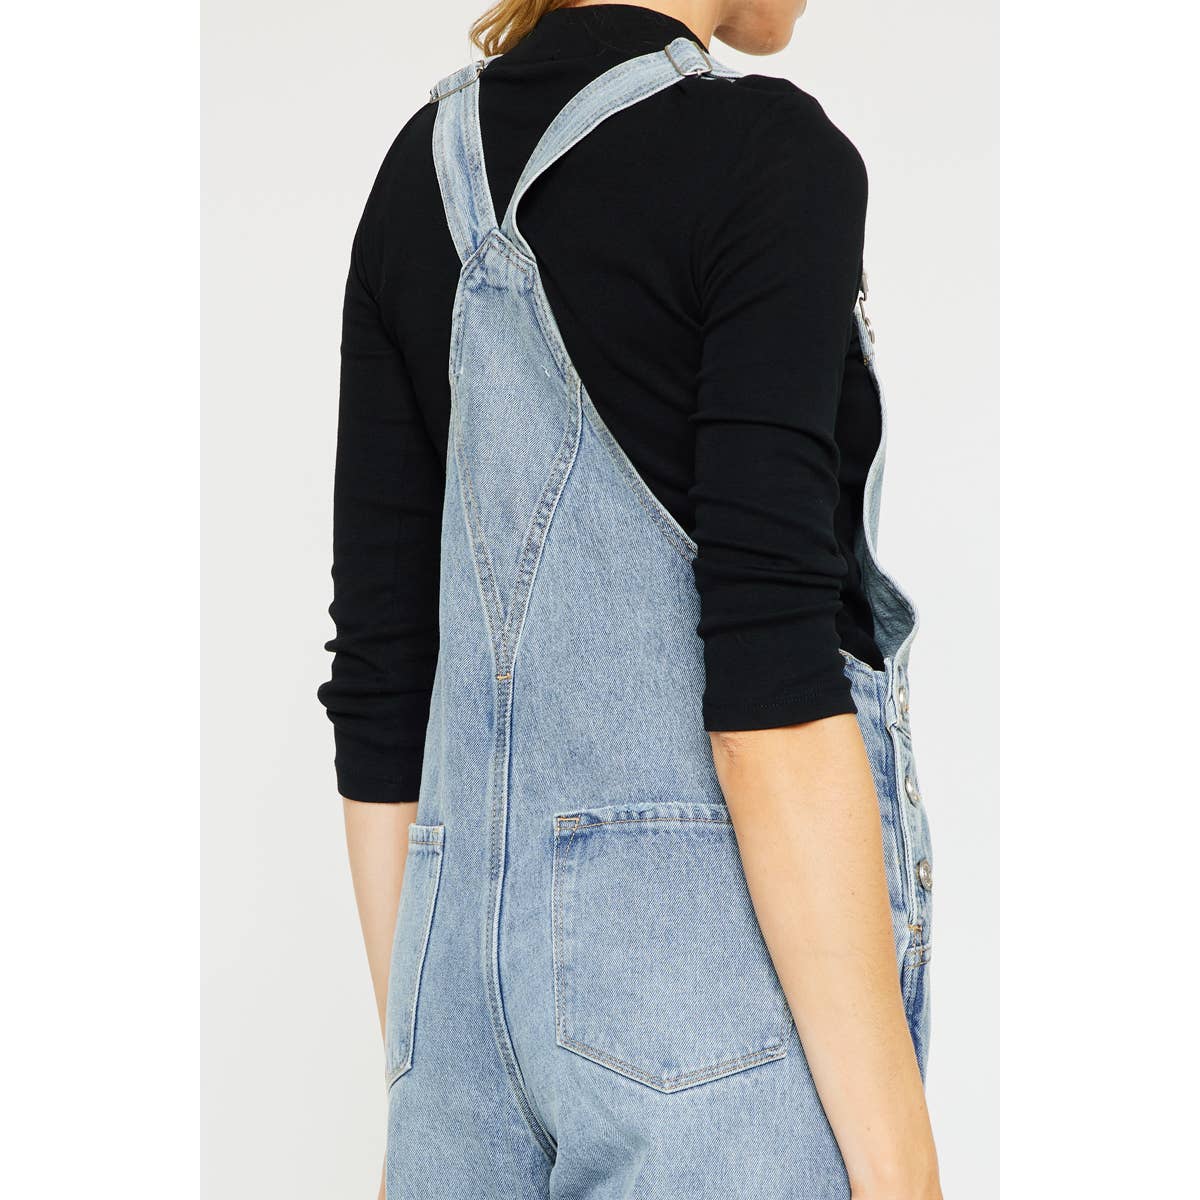 Kan Can 90’s overall